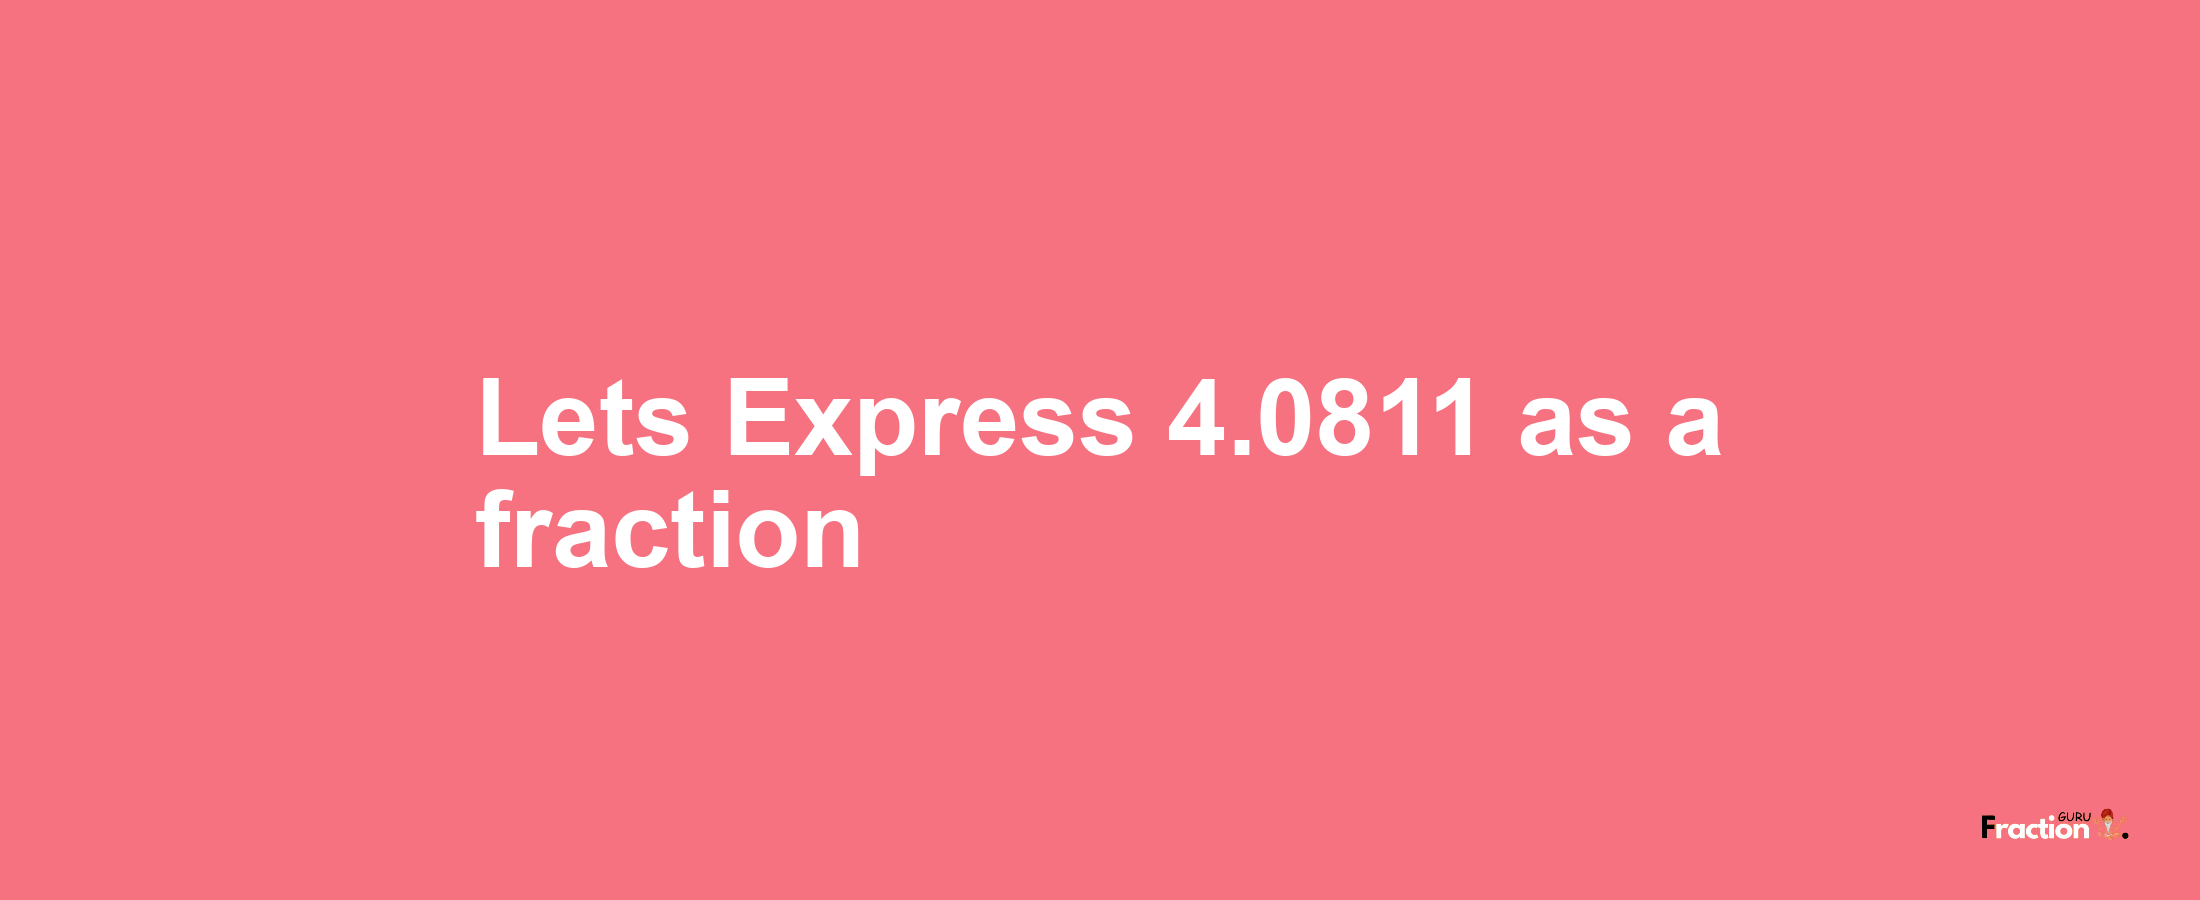 Lets Express 4.0811 as afraction